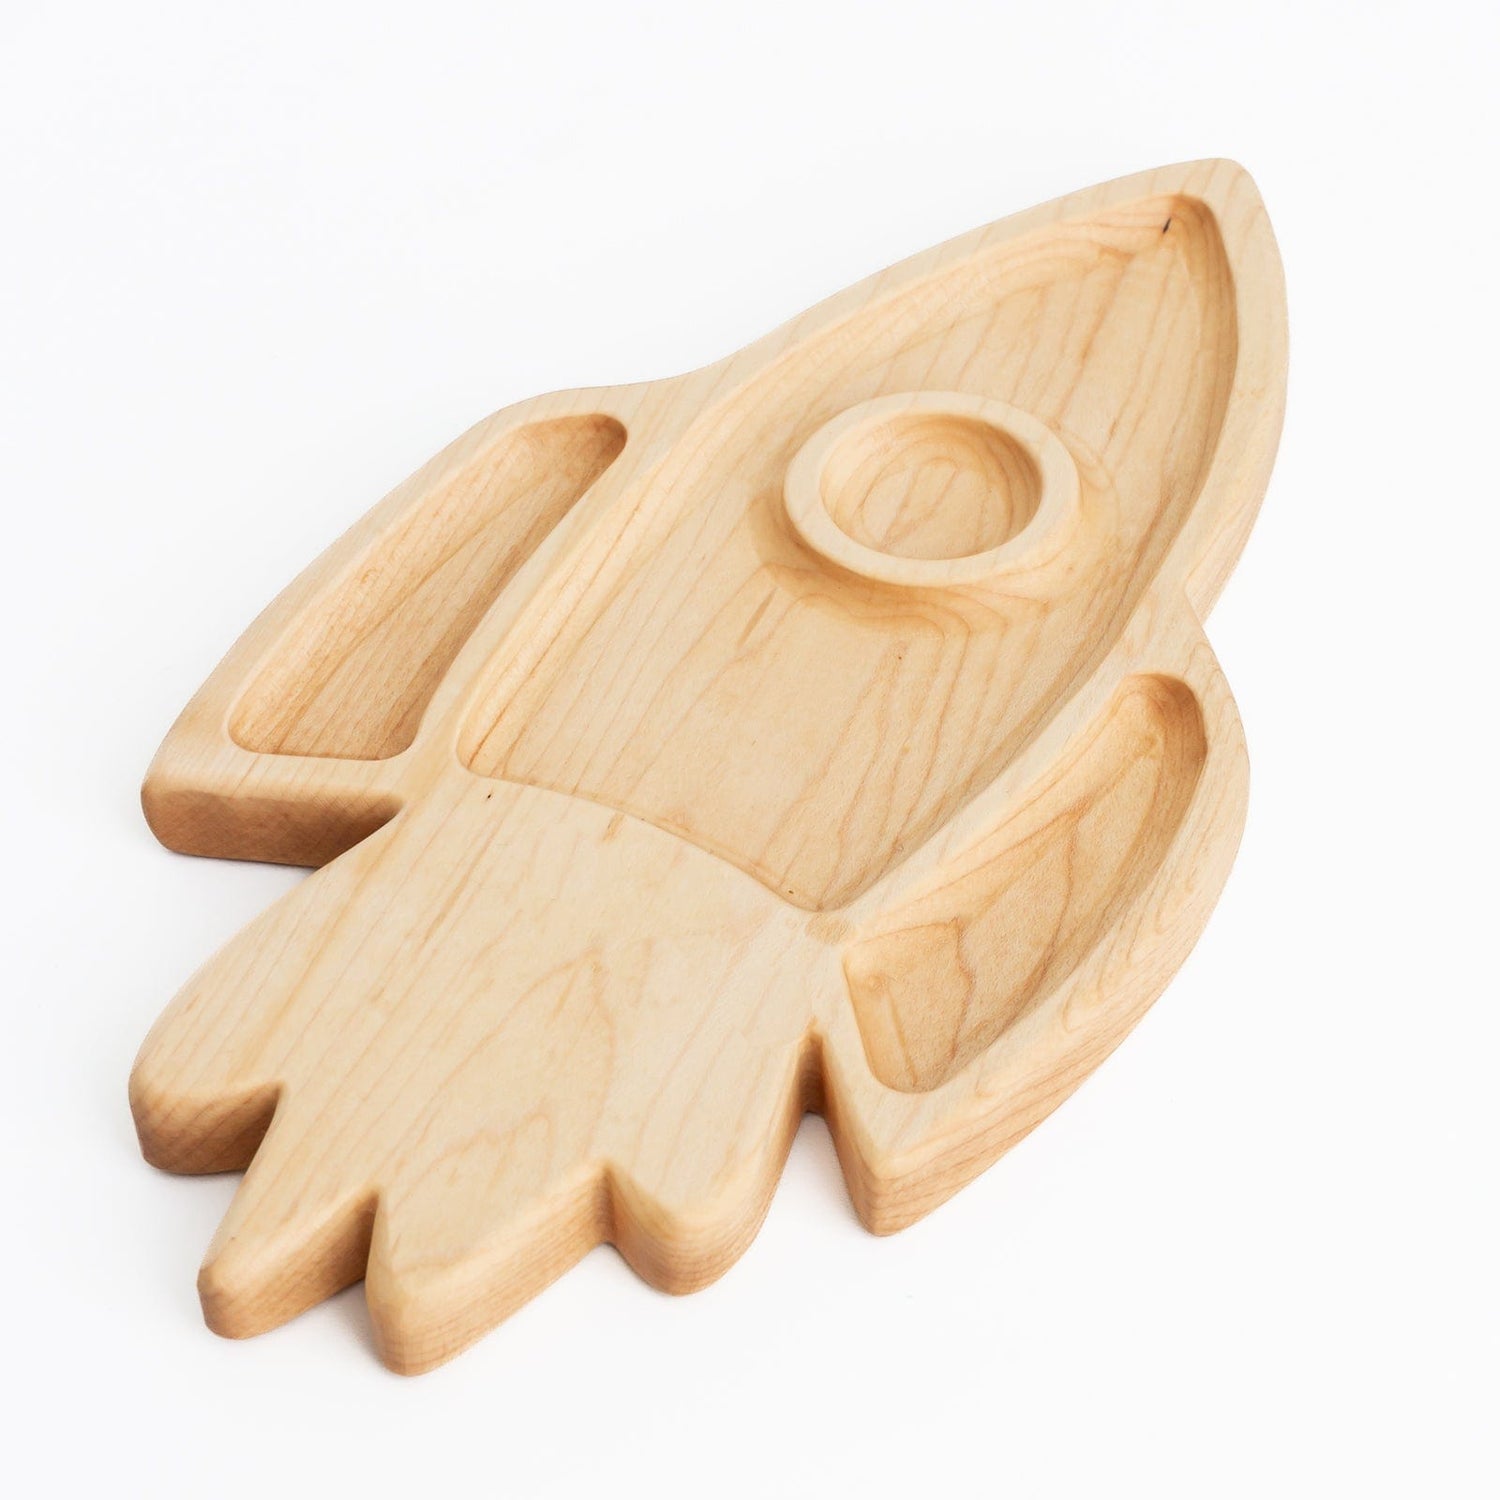 Aw & Co. Sensory Play Wooden Rocket Plate / Sensory Tray (Made in Canada)